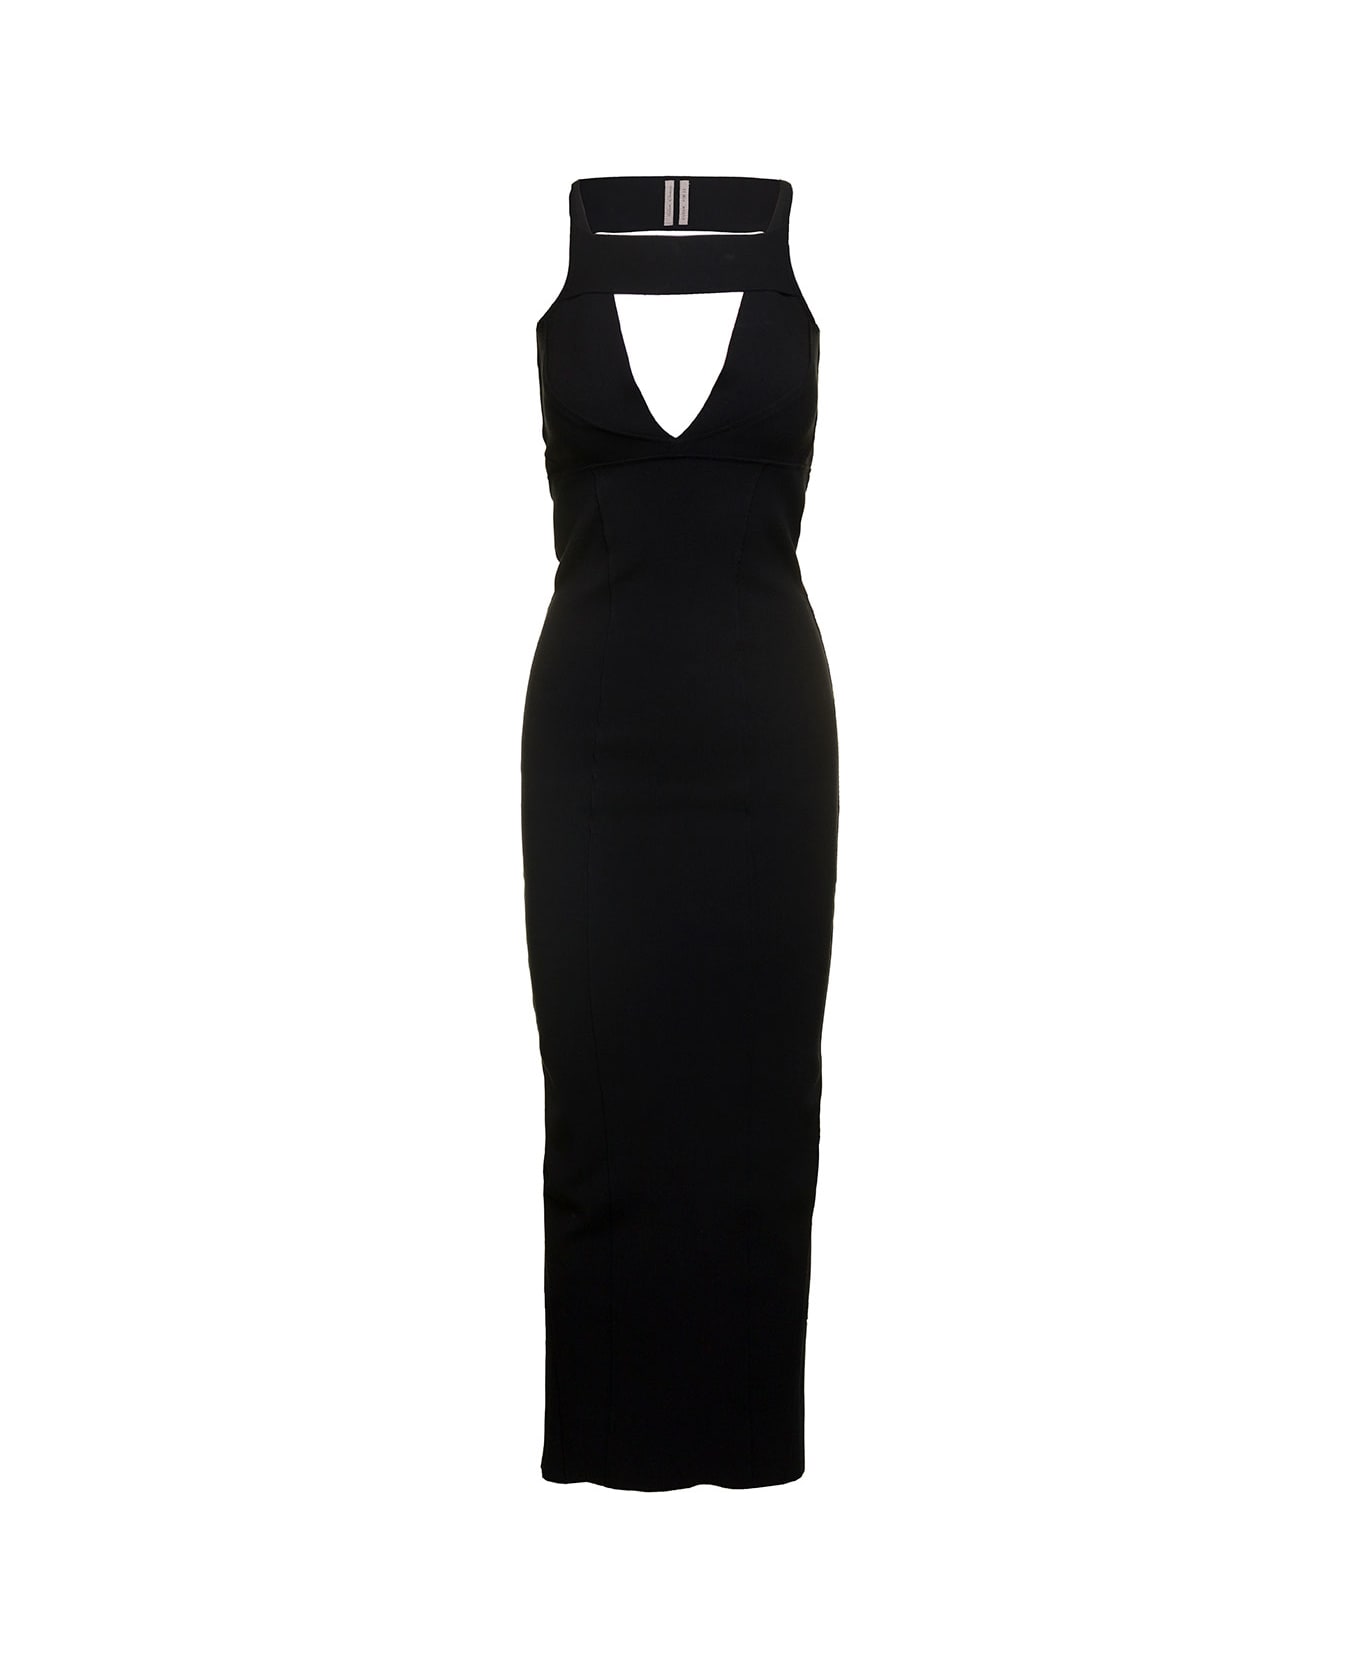 Rick Owens Maxi Black Dress With Cut-out In Viscose Blend Woman - Black